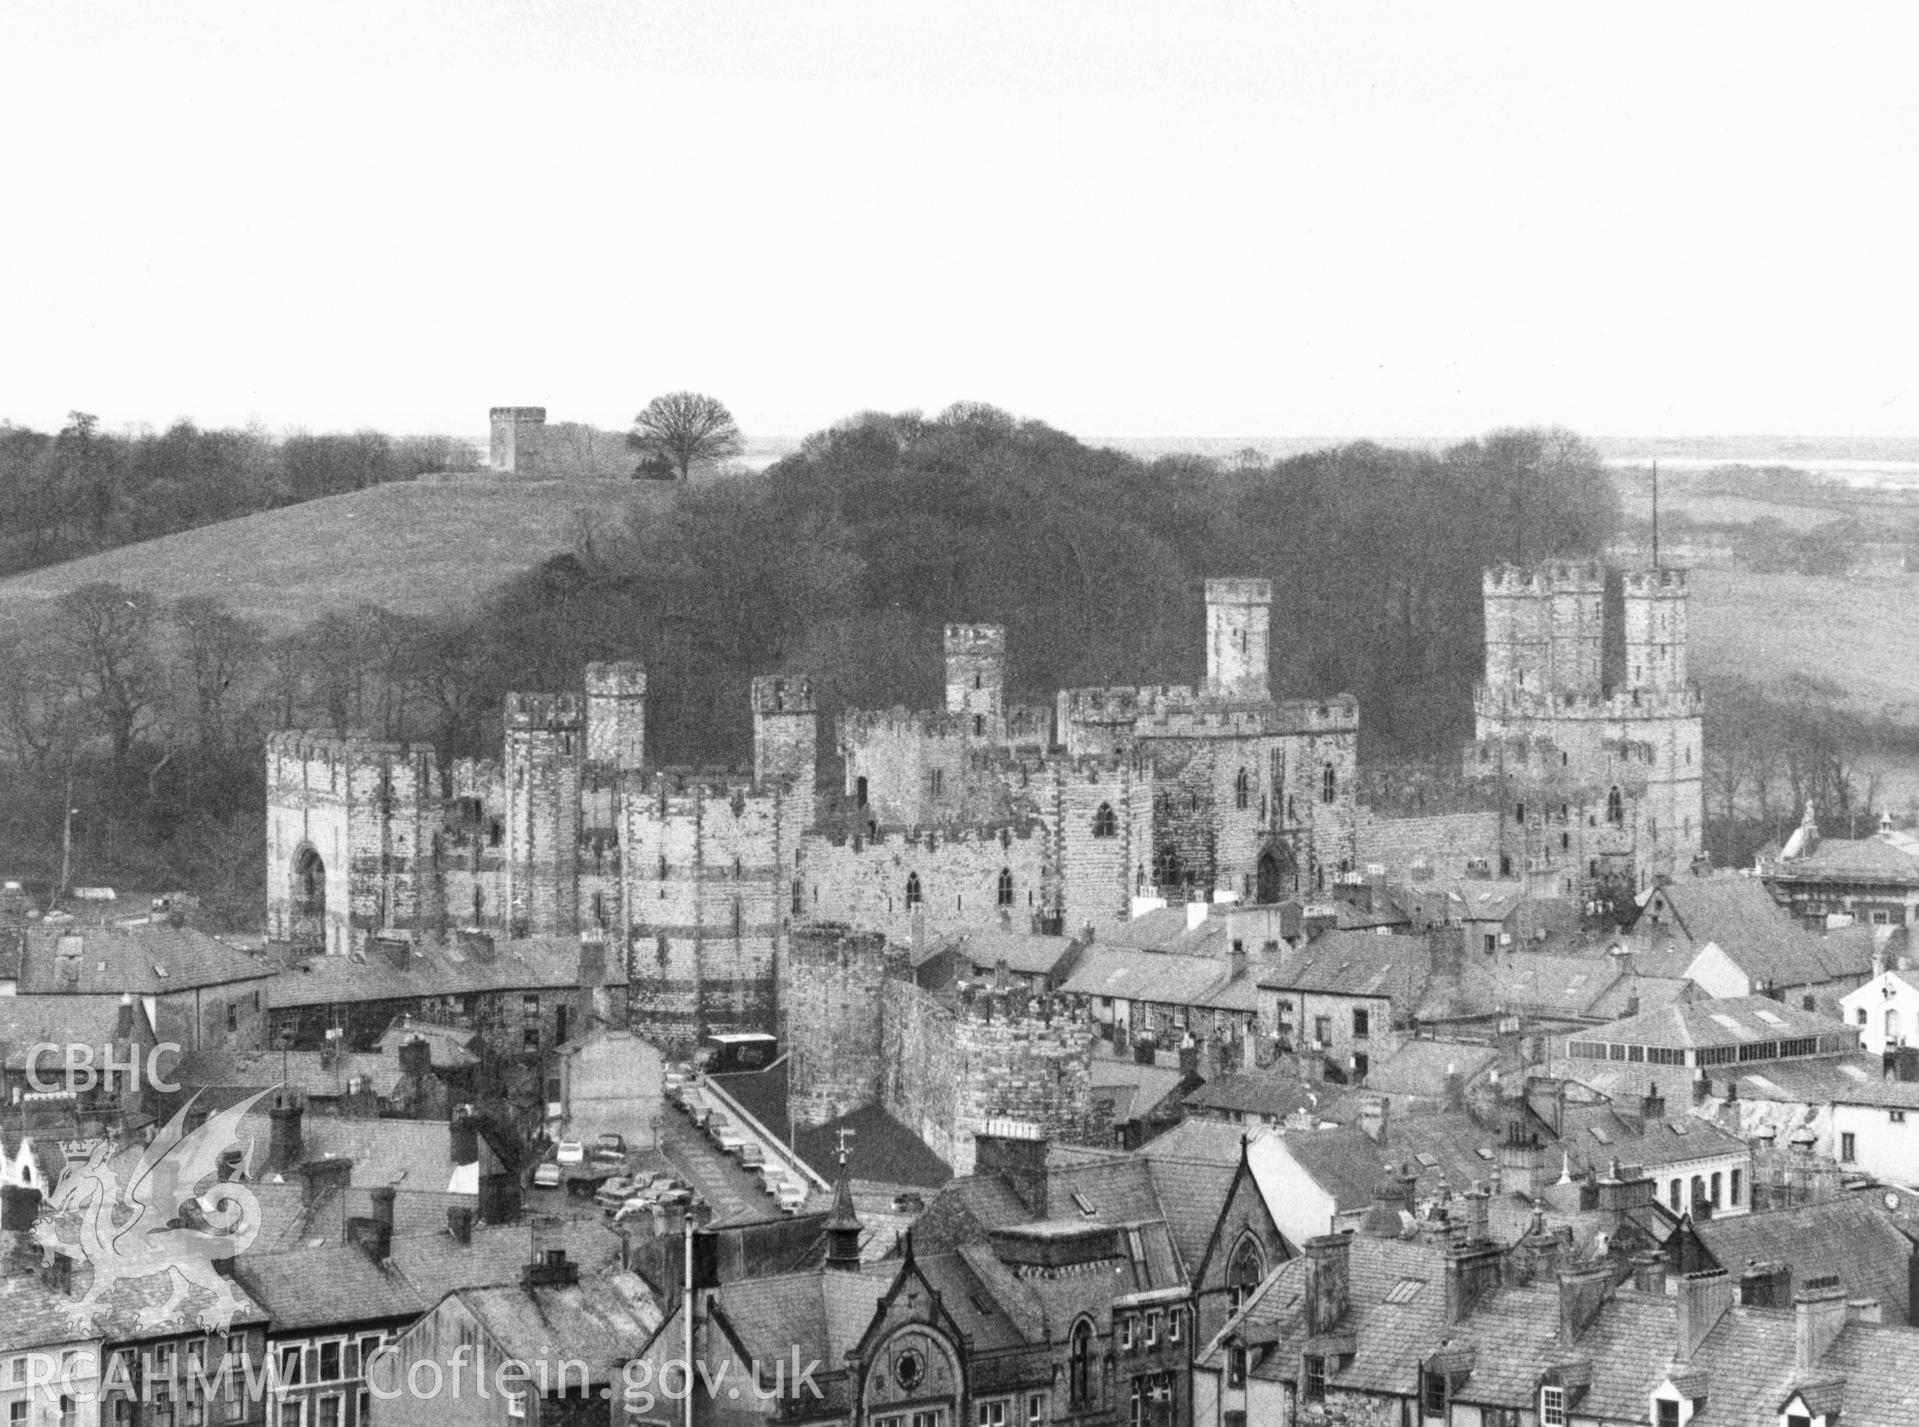 1 b/w print showing aspect of Caernarfon castle, collated by the former Central Office of Information.